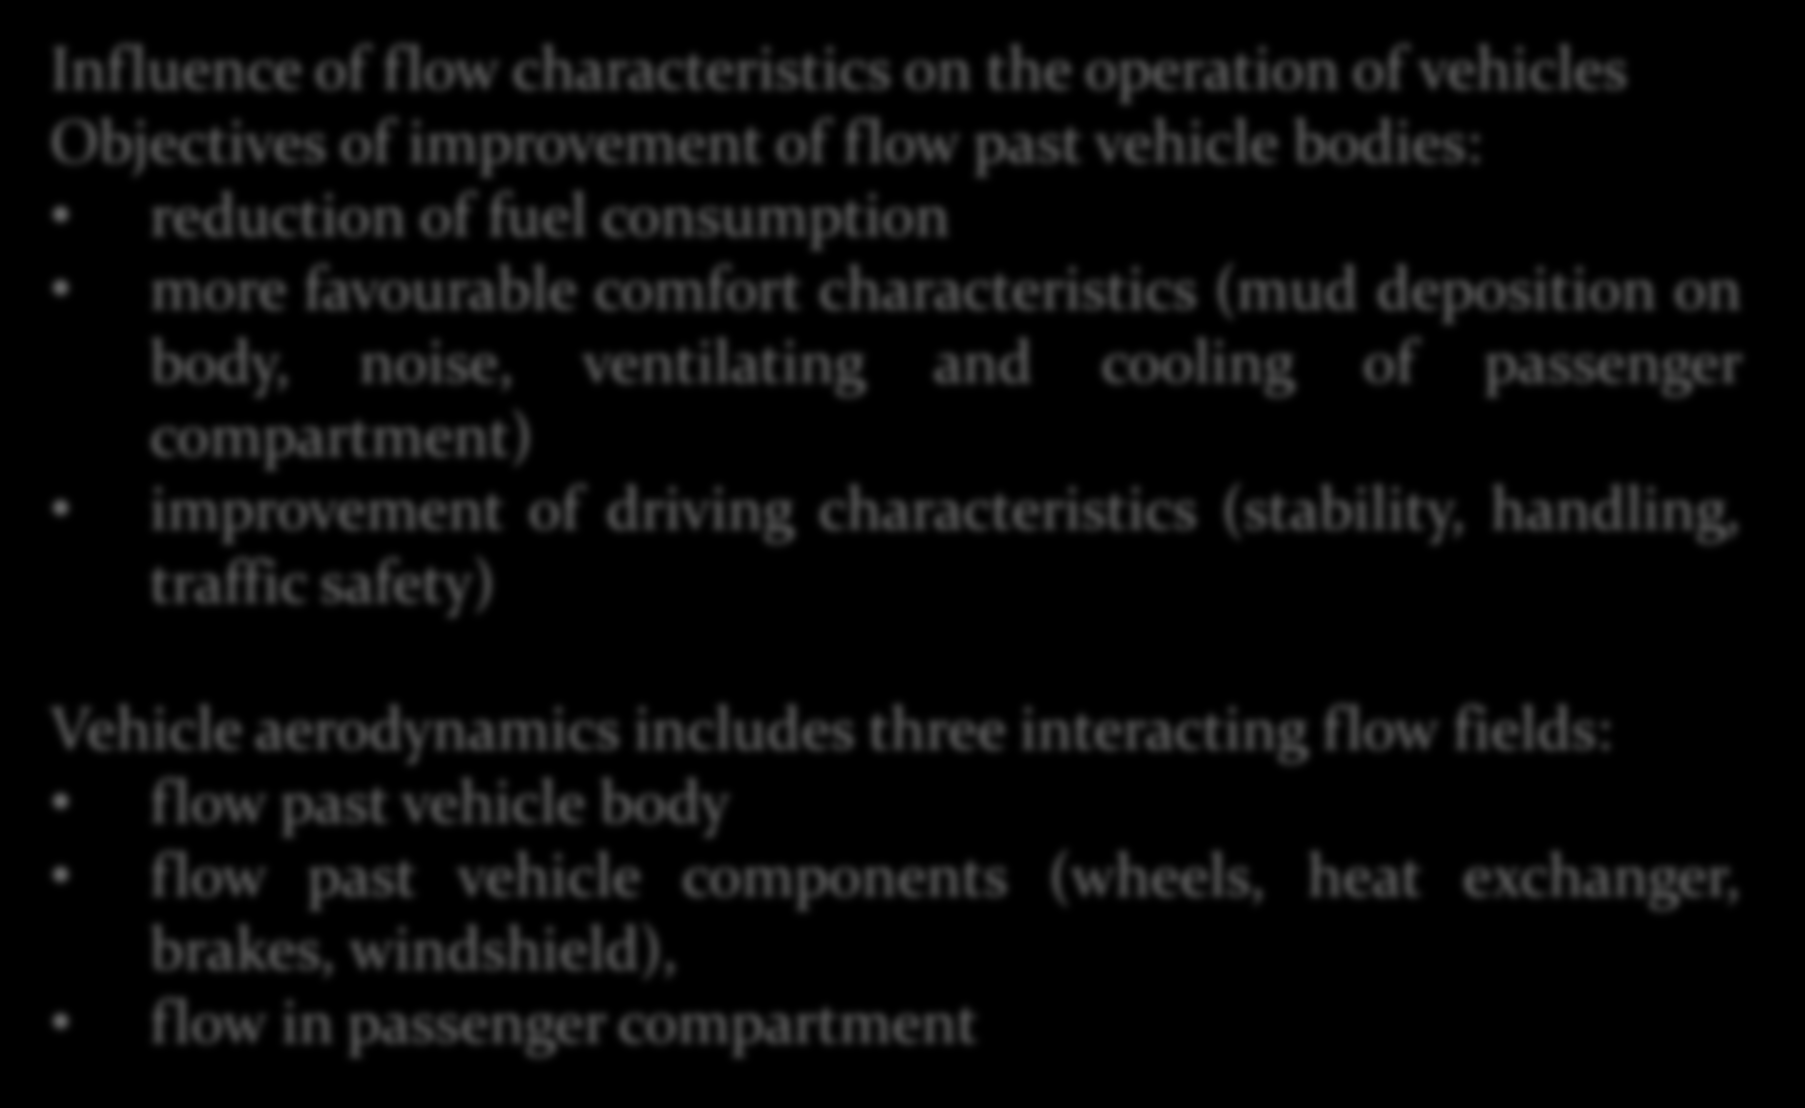 Araç Aerodinamiği Influence of flow characteristics on the operation of vehicles Objectives of improvement of flow past vehicle bodies: reduction of fuel consumption more favourable comfort